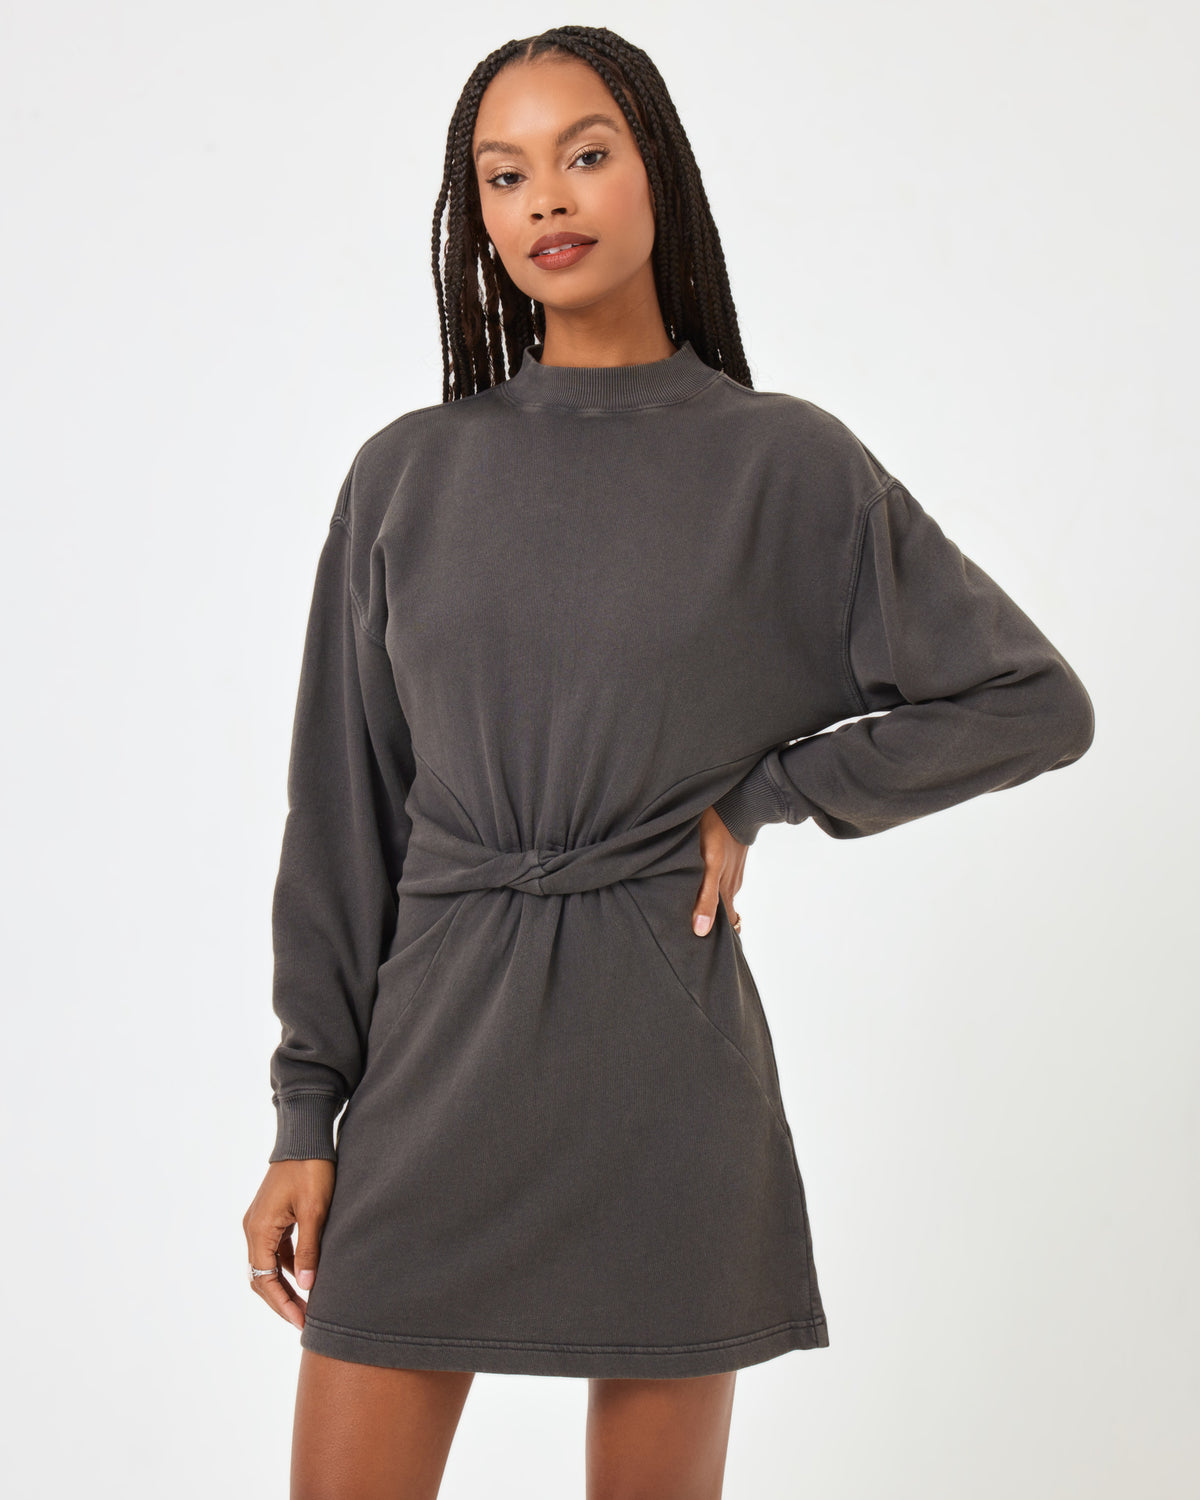 Asher Dress - Charcoal Ash | Model: Taelor (size: S) | Hover